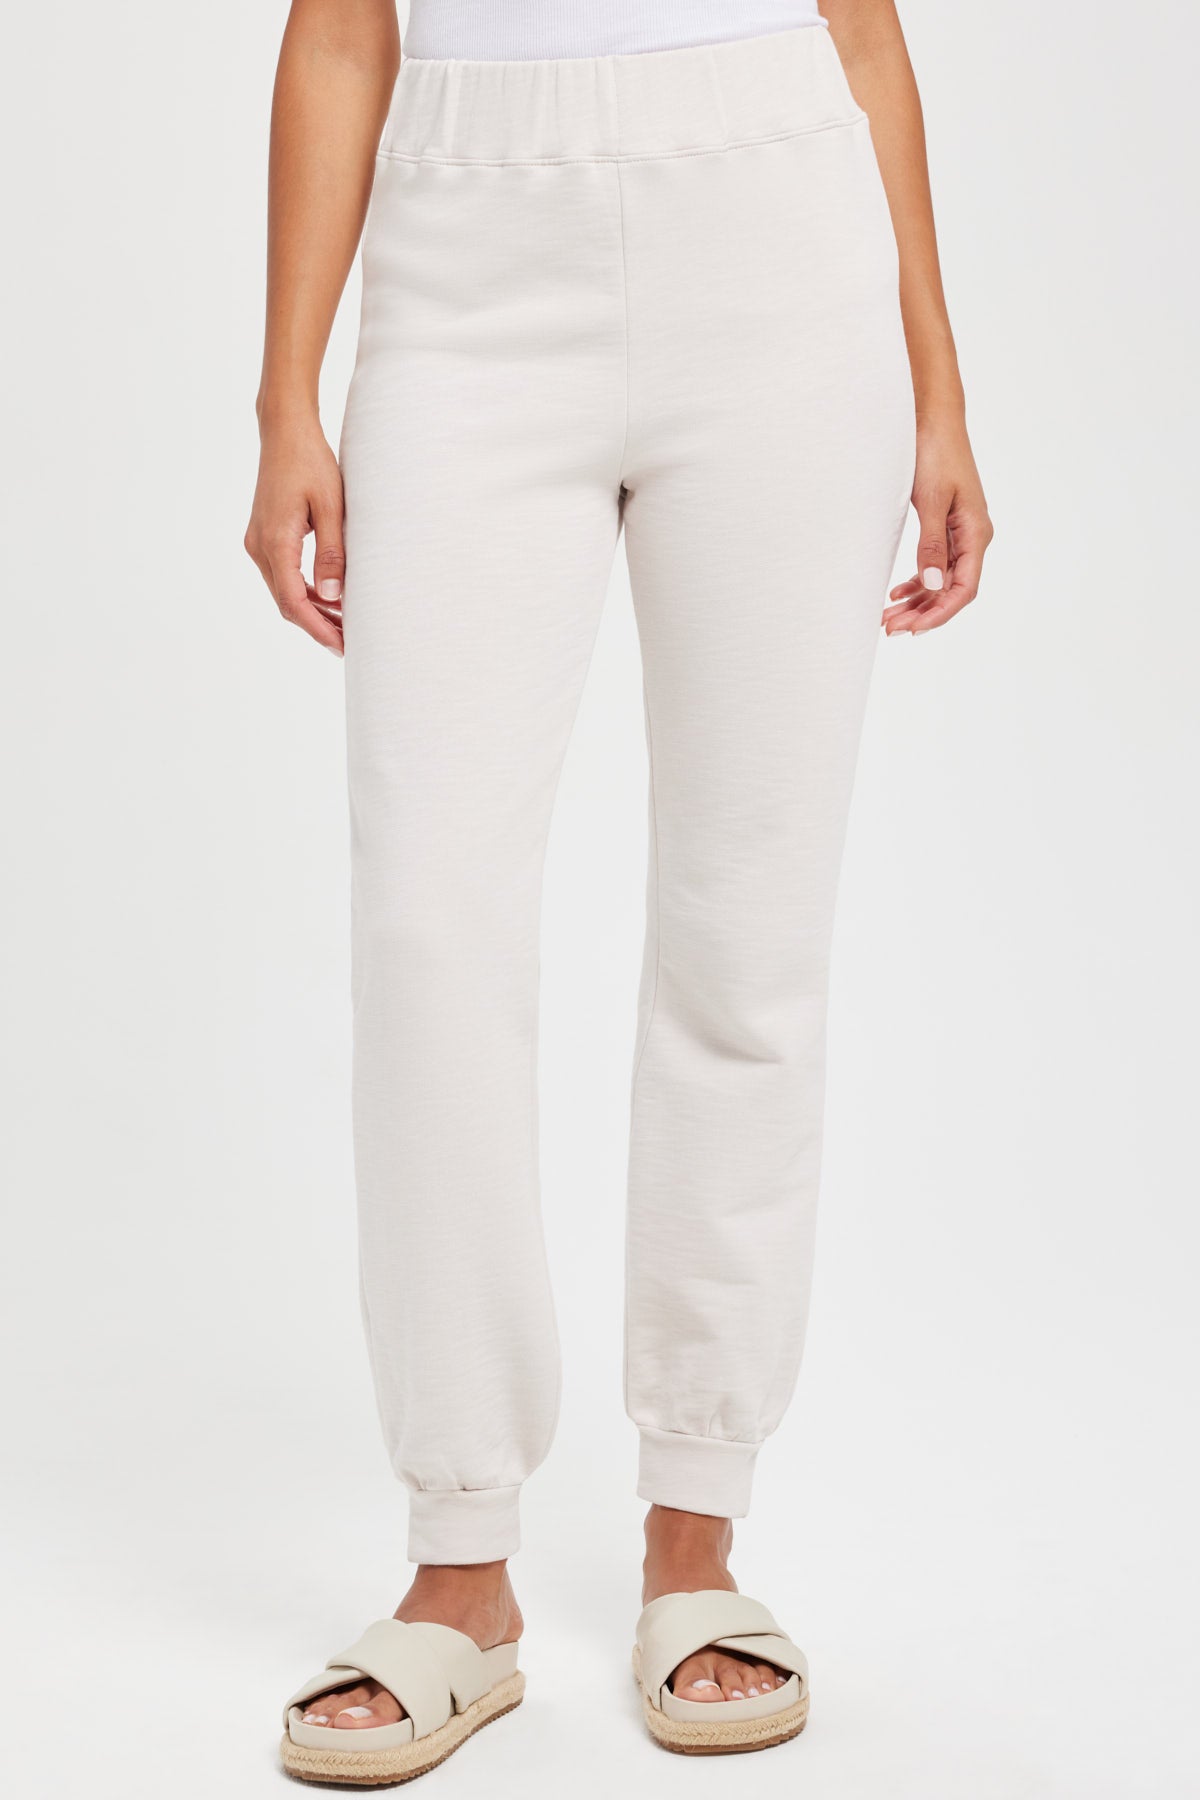 Melrose Cuffed Jogger - Goldie LeWinter